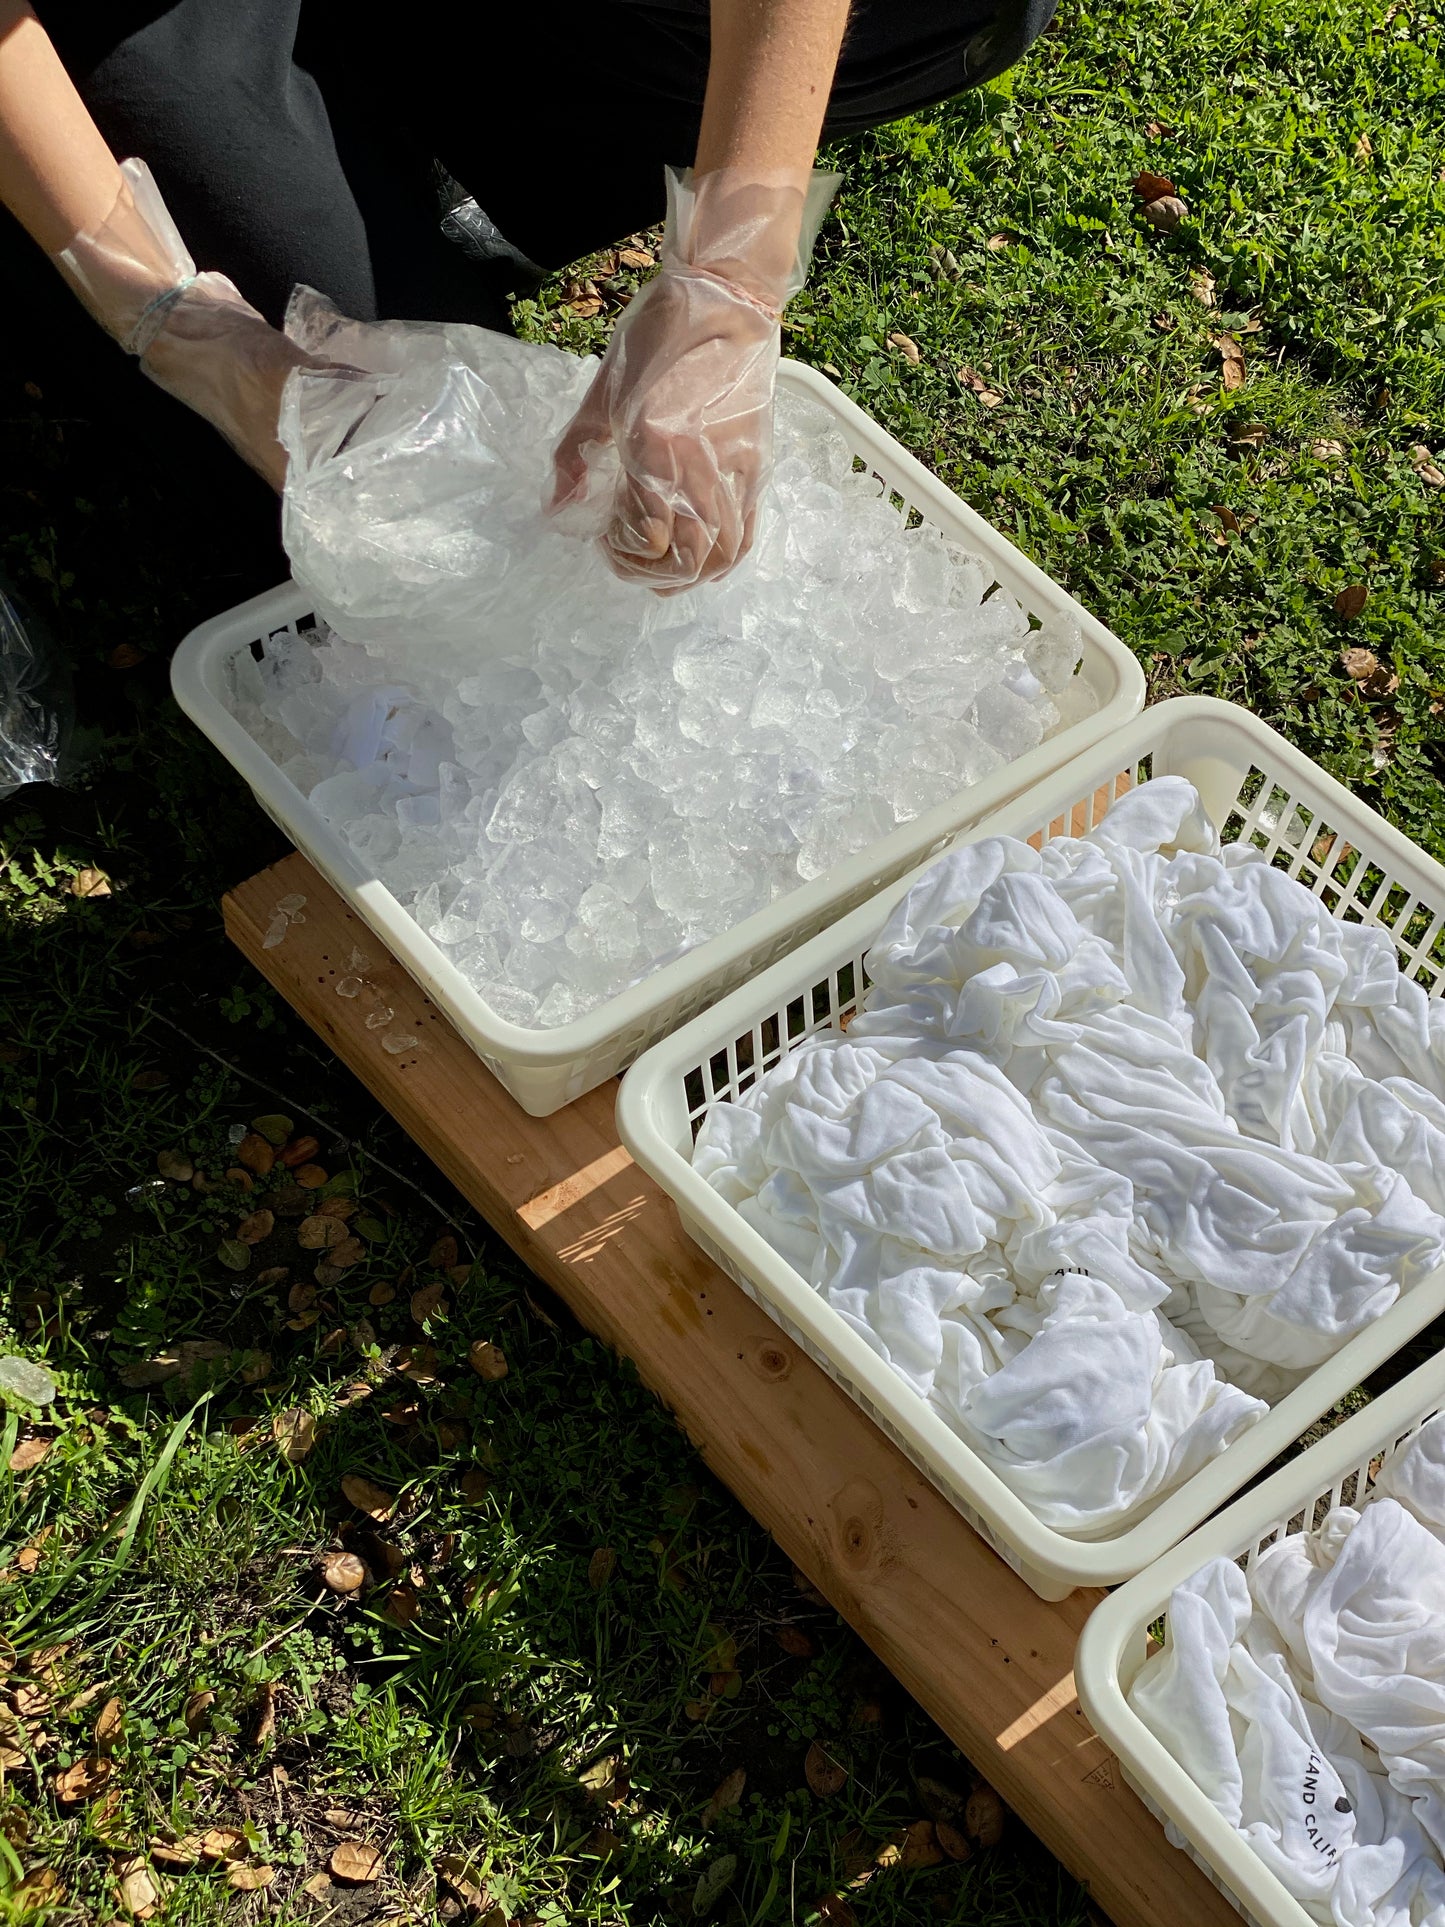 Trays filled with ice showing dye process for sweatshirts